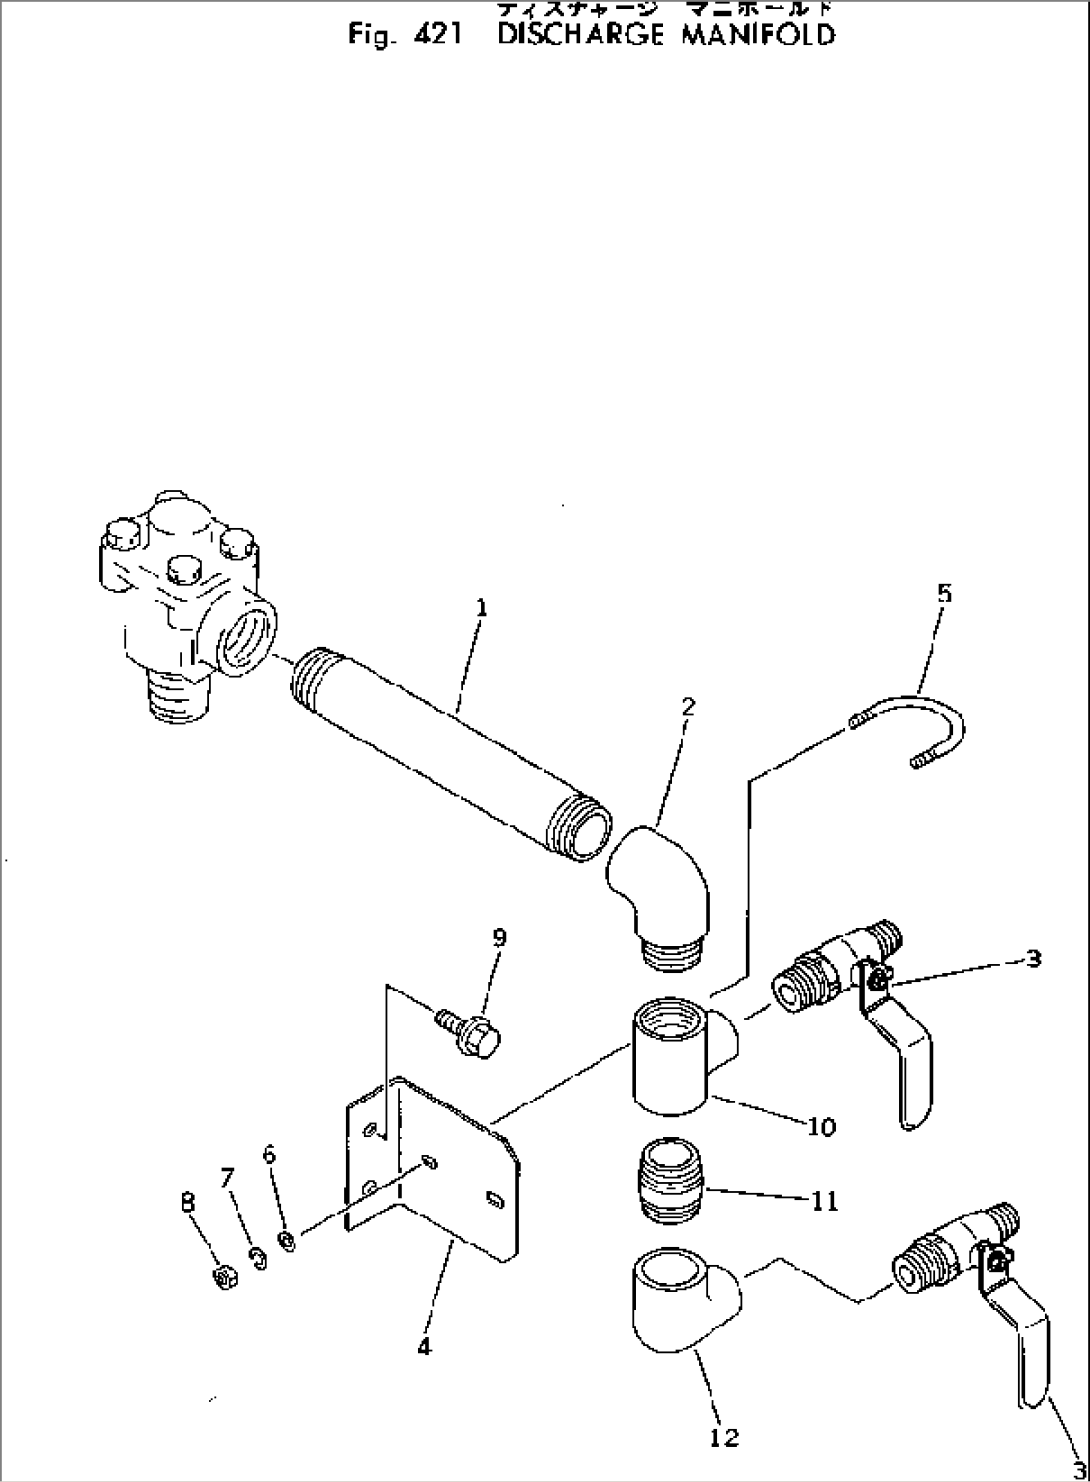 DISCHARGE MANIFOLD